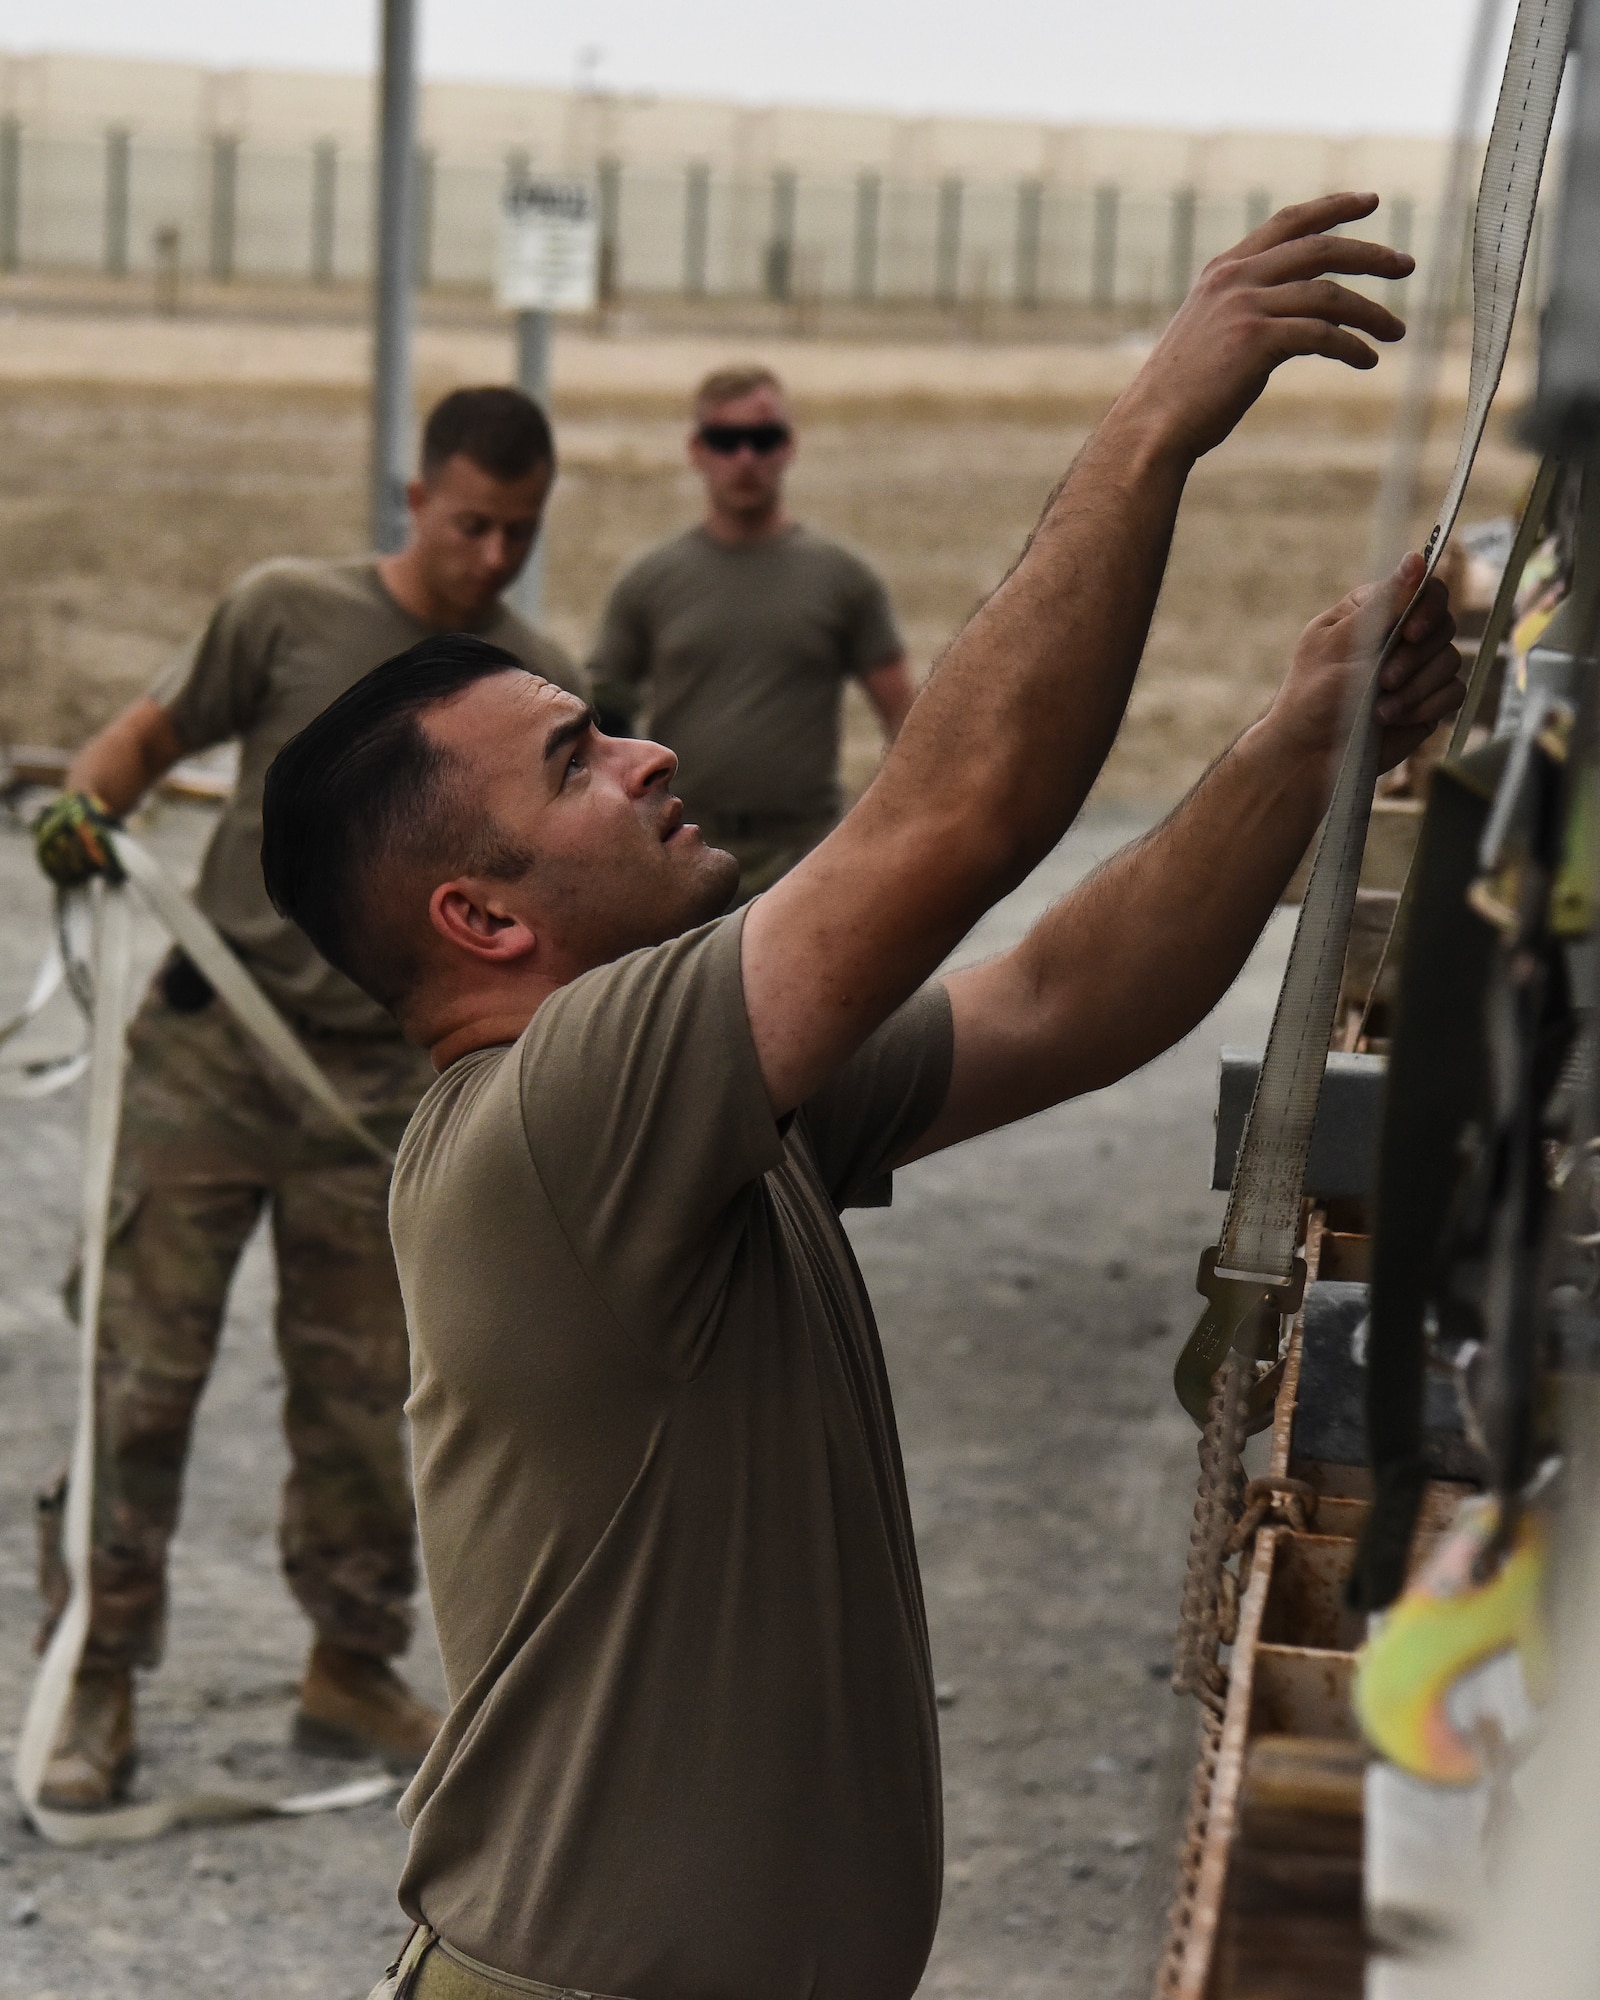 Airmen assigned to the 380th Expeditionary Maintenance Squadron munitions flight, load guiding sections at Al Dhafra Air Base, United Arab Emirates, Feb. 15, 2019. The 380th EMXS munitions flight, also known as Ammo flight, is a 10-man team that has heavily supported the 380th Expeditionary Civil Engineer Squadron Explosive Ordnance Disposal flight, 380th Expeditionary Security Forces Squadron K-9 unit, Army Search and Rescue teams, Navy SEAL teams, coalition forces and host nation forces through the U.S. Central Command’s area of responsibility. (U.S. Air Force photo by Senior Airman Mya M. Crosby)